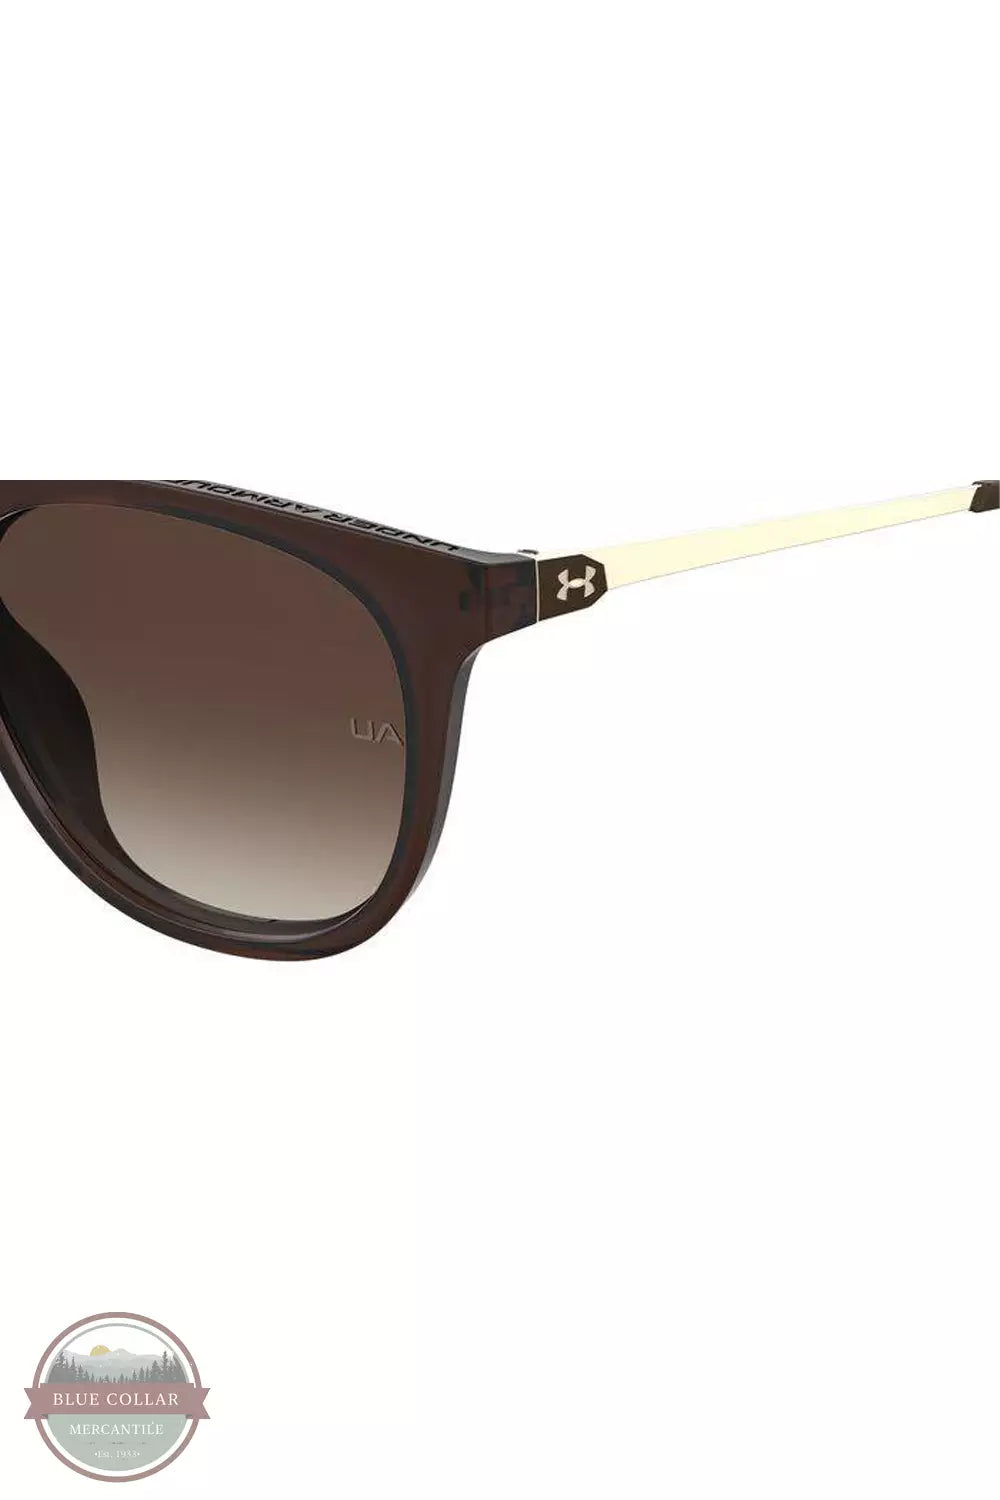 Under Armour 1372222-200 Circuit Sunglasses in Brown / Shiny Gold Detail View